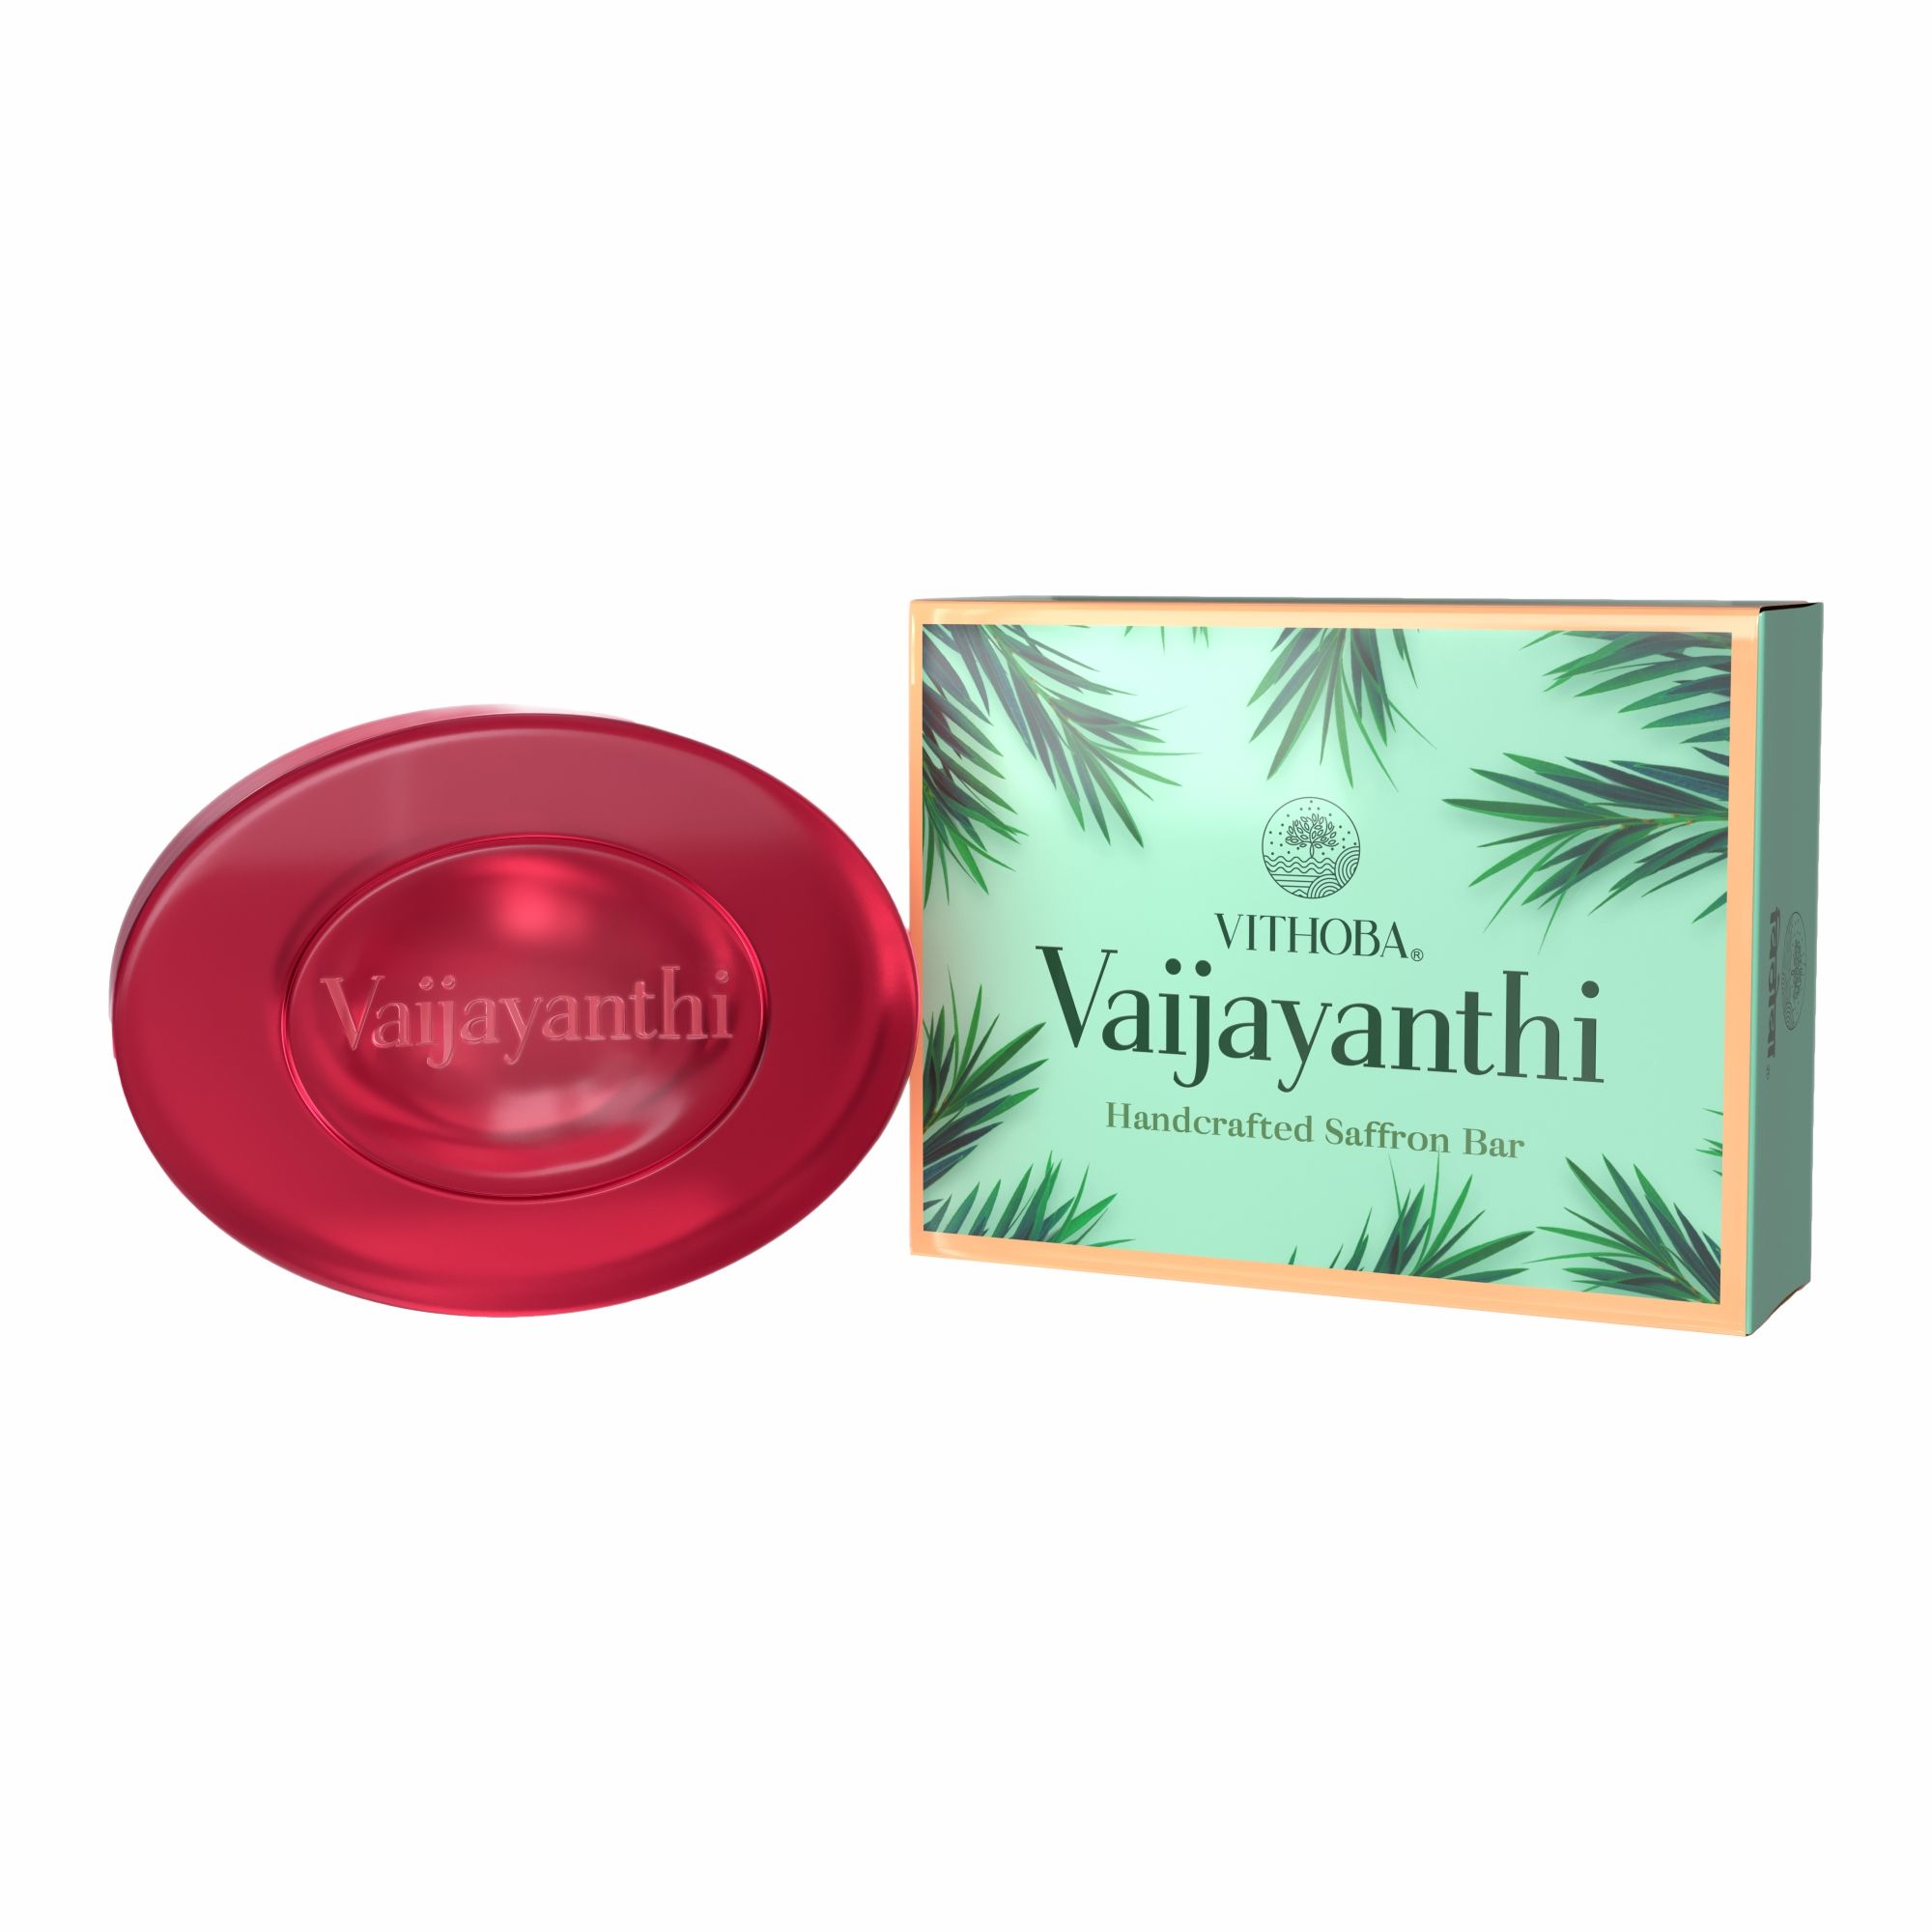 Vithoba Vaijayanthi Handcrafted Saffron Soap Bar | Real Kesar Soap For Blemishfree Soft & Natural Glow | With Goodness Of Turmeric Oil  Glycerin & Coconut Oil | 75g |